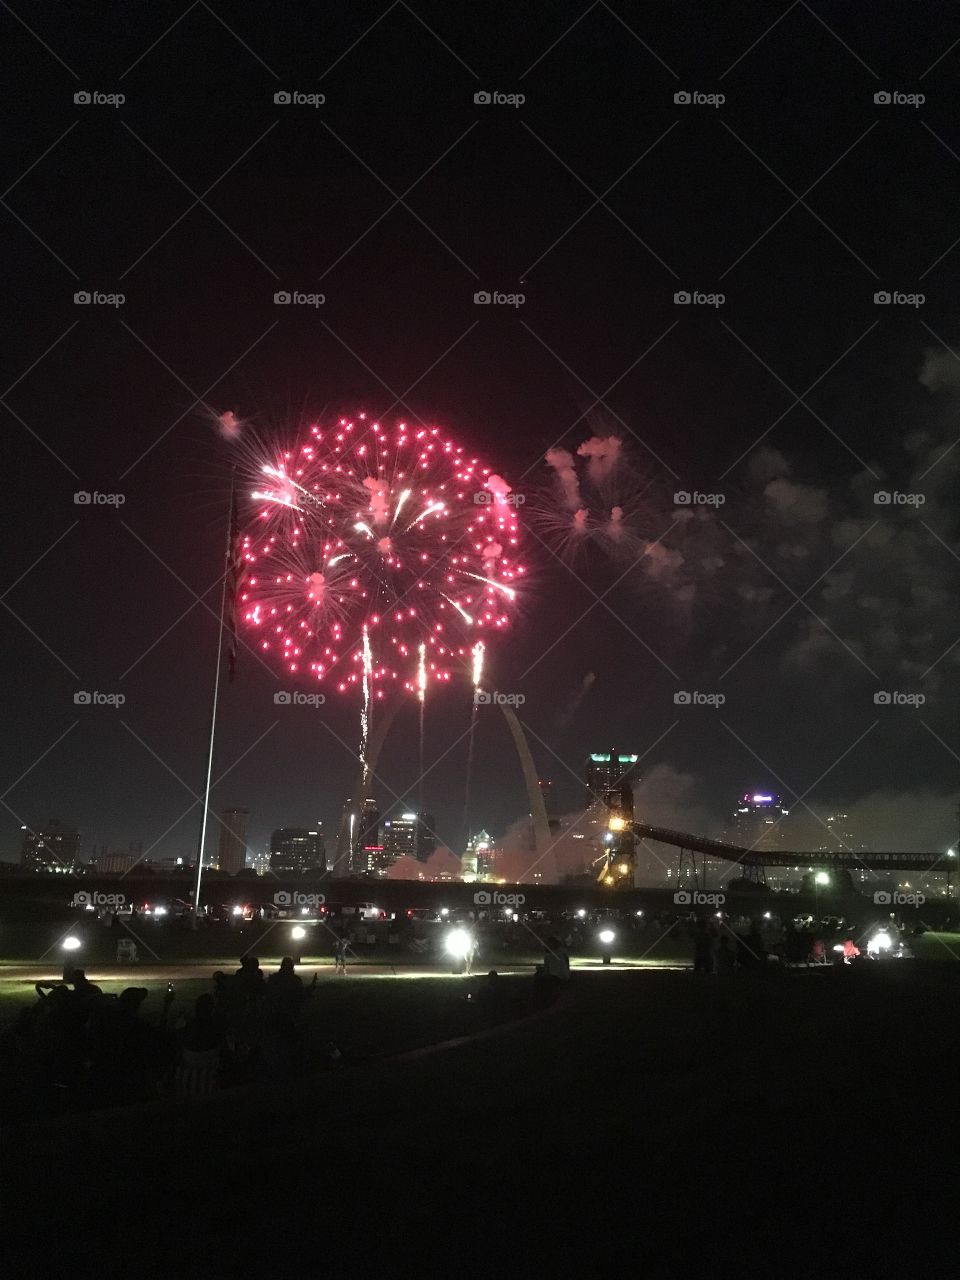 Fireworks over St. Louis